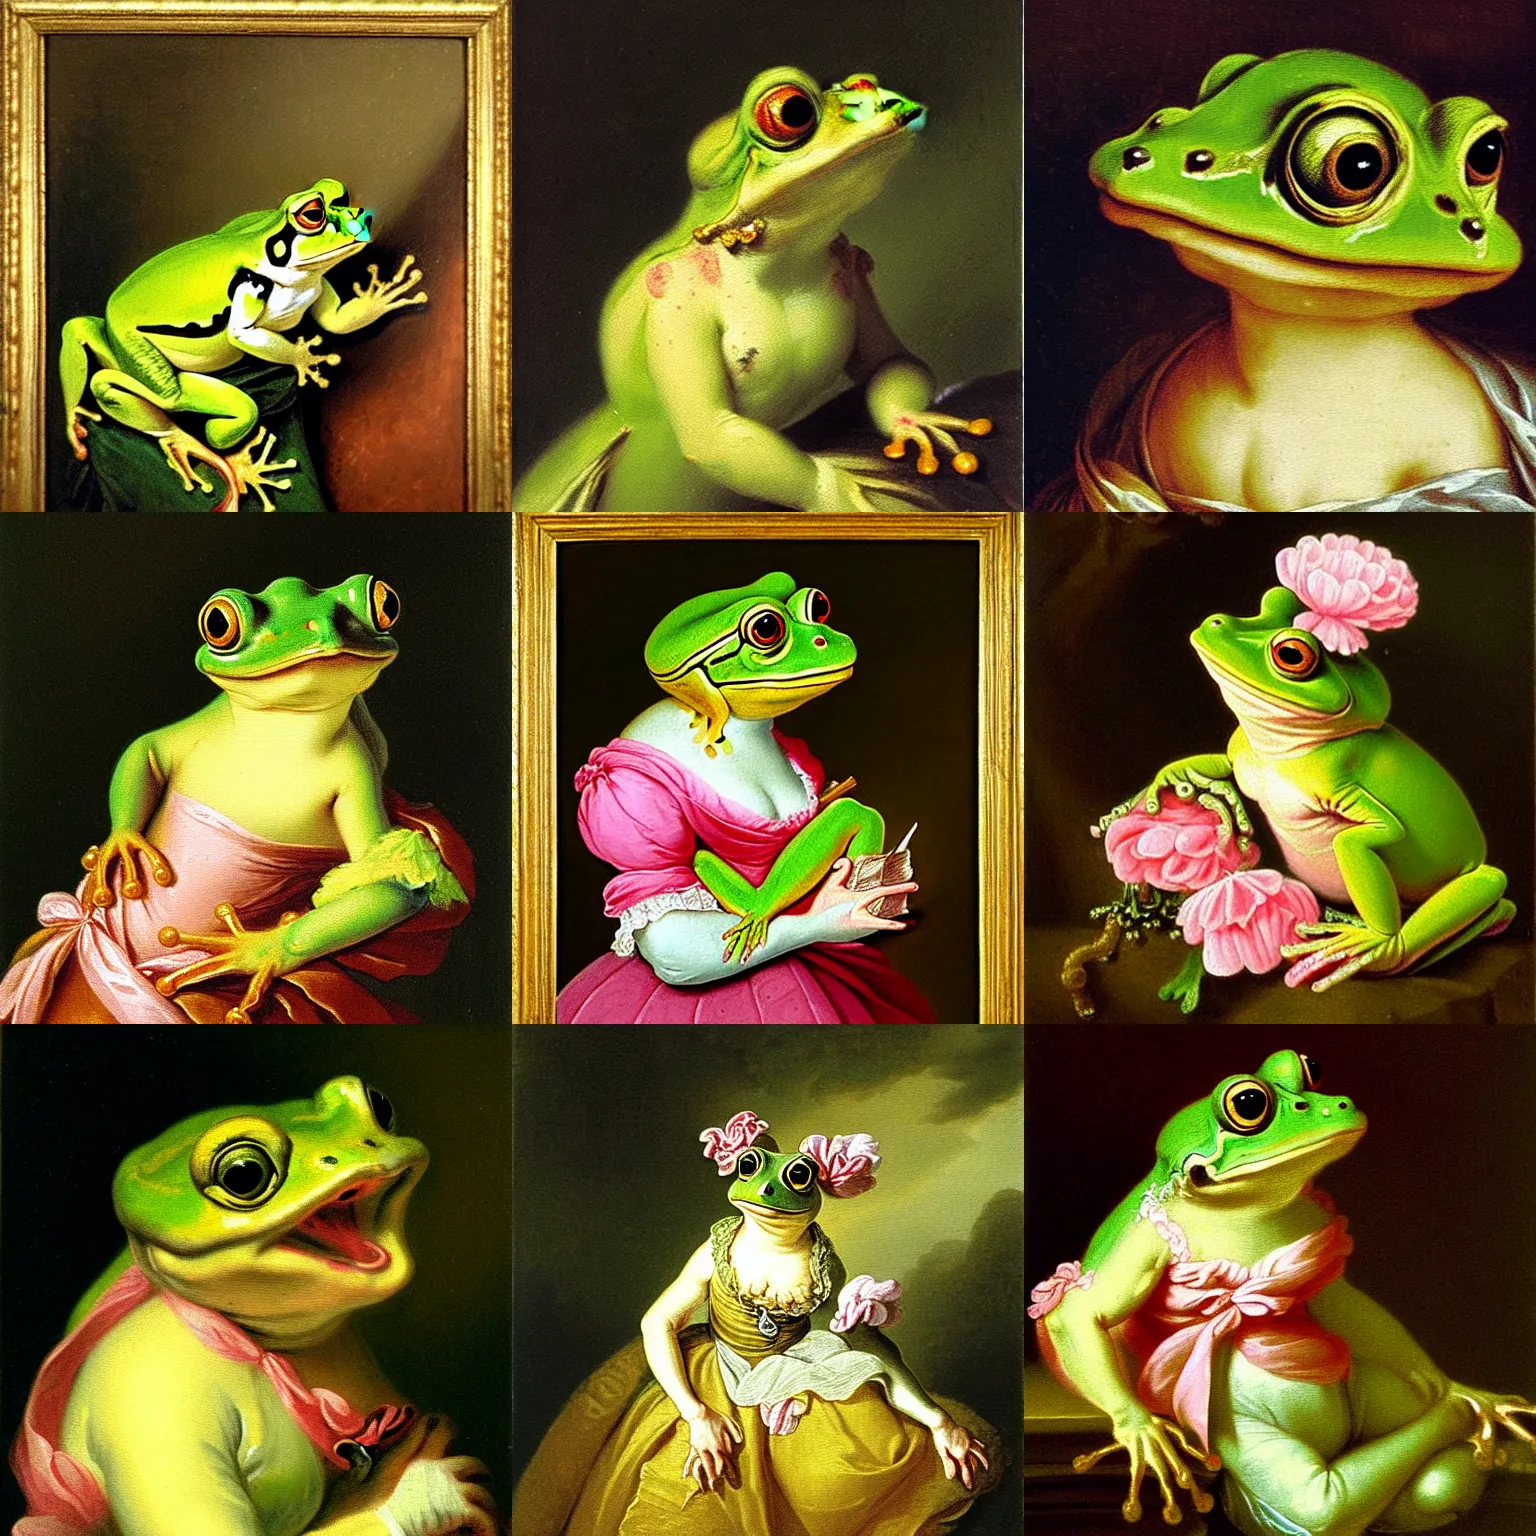 Prompt: portrait rococo painting of Princess frog by Jean‑Honoré Fragonard